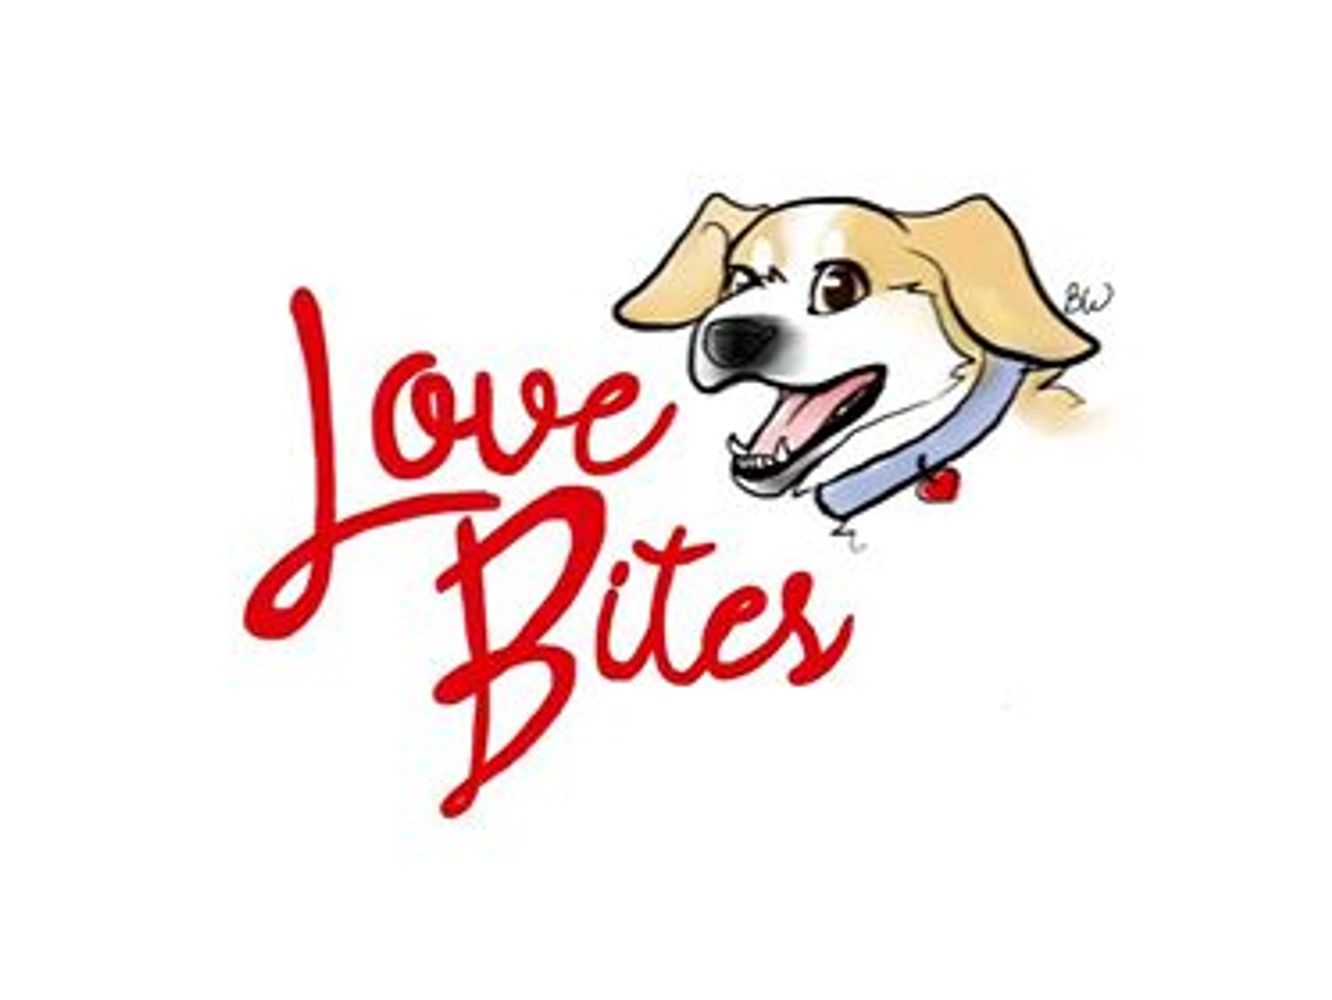 Love Bites are hand made pet treats of the finest quality with no additives or preservatives.